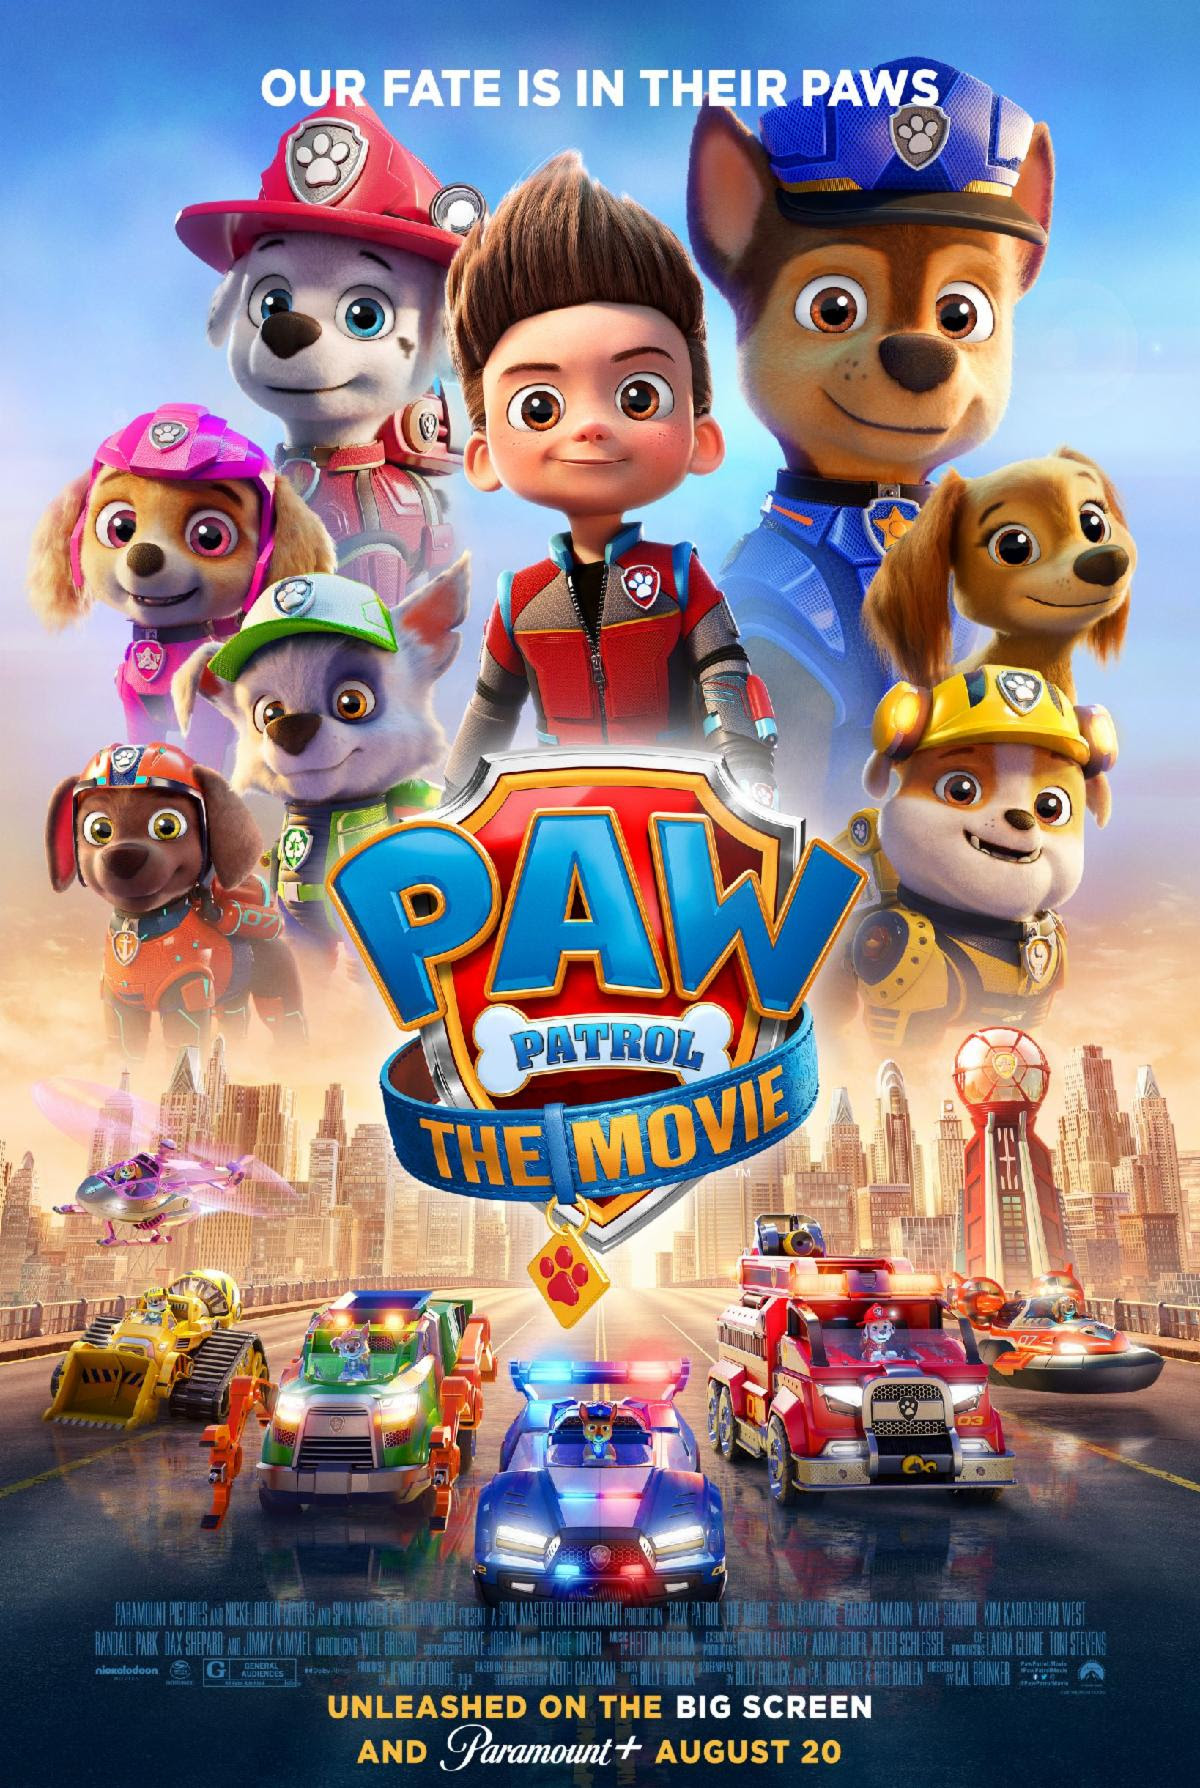 Paw Patrol The Movie is Coming on August 20th!